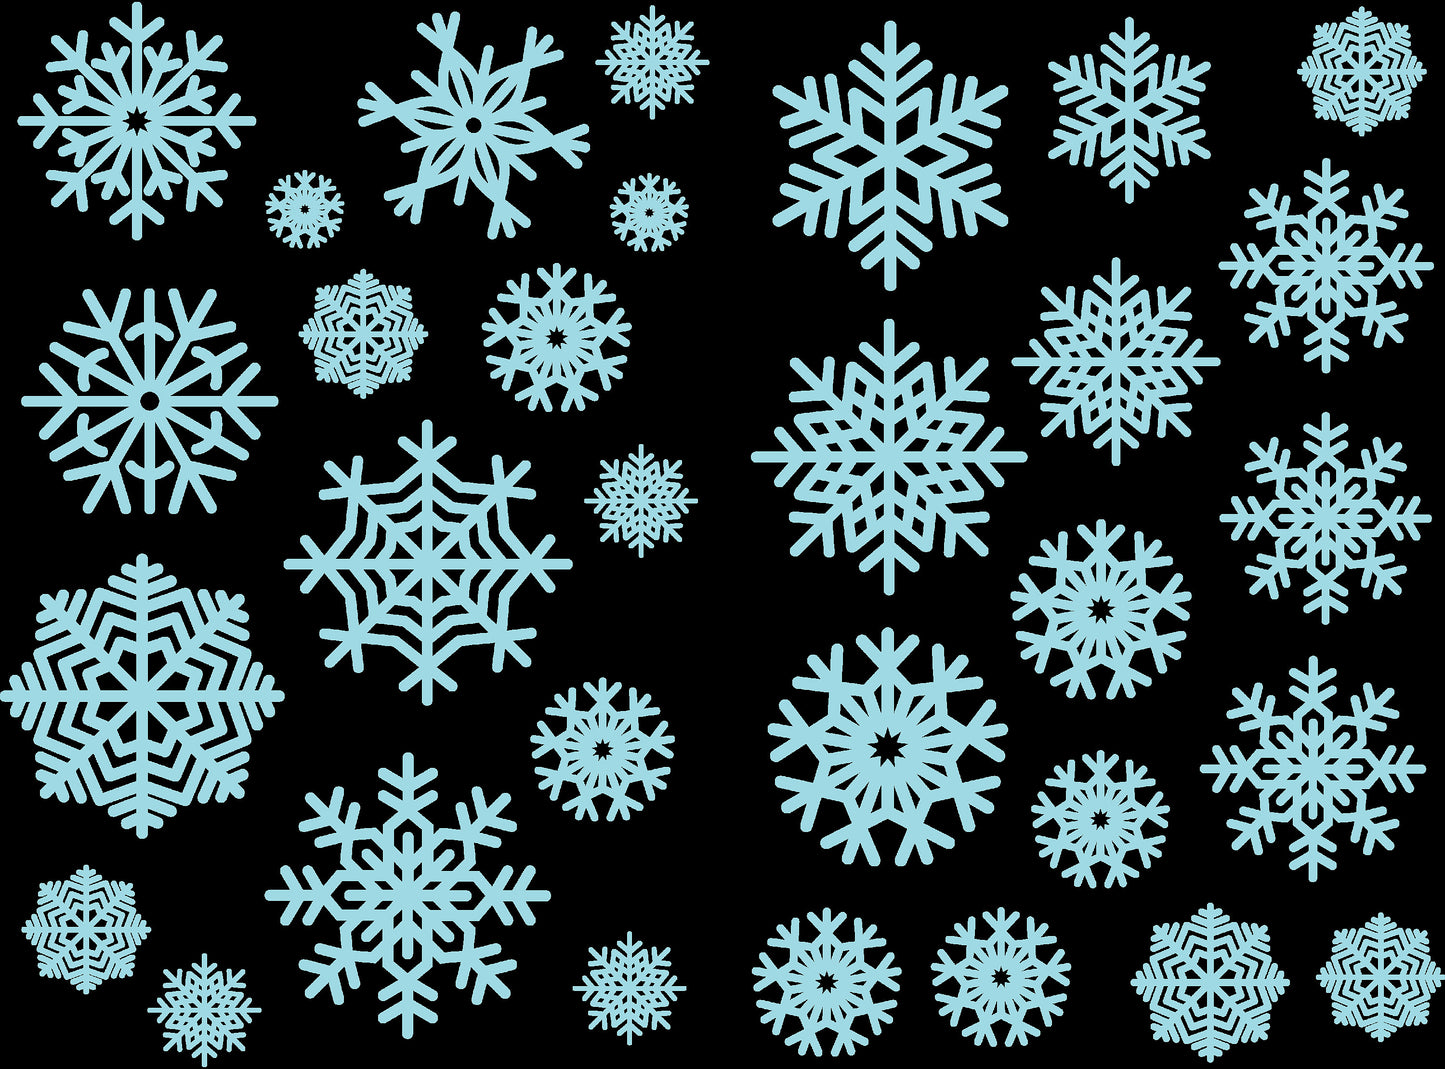 Christmas Snowflake Window Stickers For Shop Window Fronts Home Xmas Window Decals Decorations Kids Children's